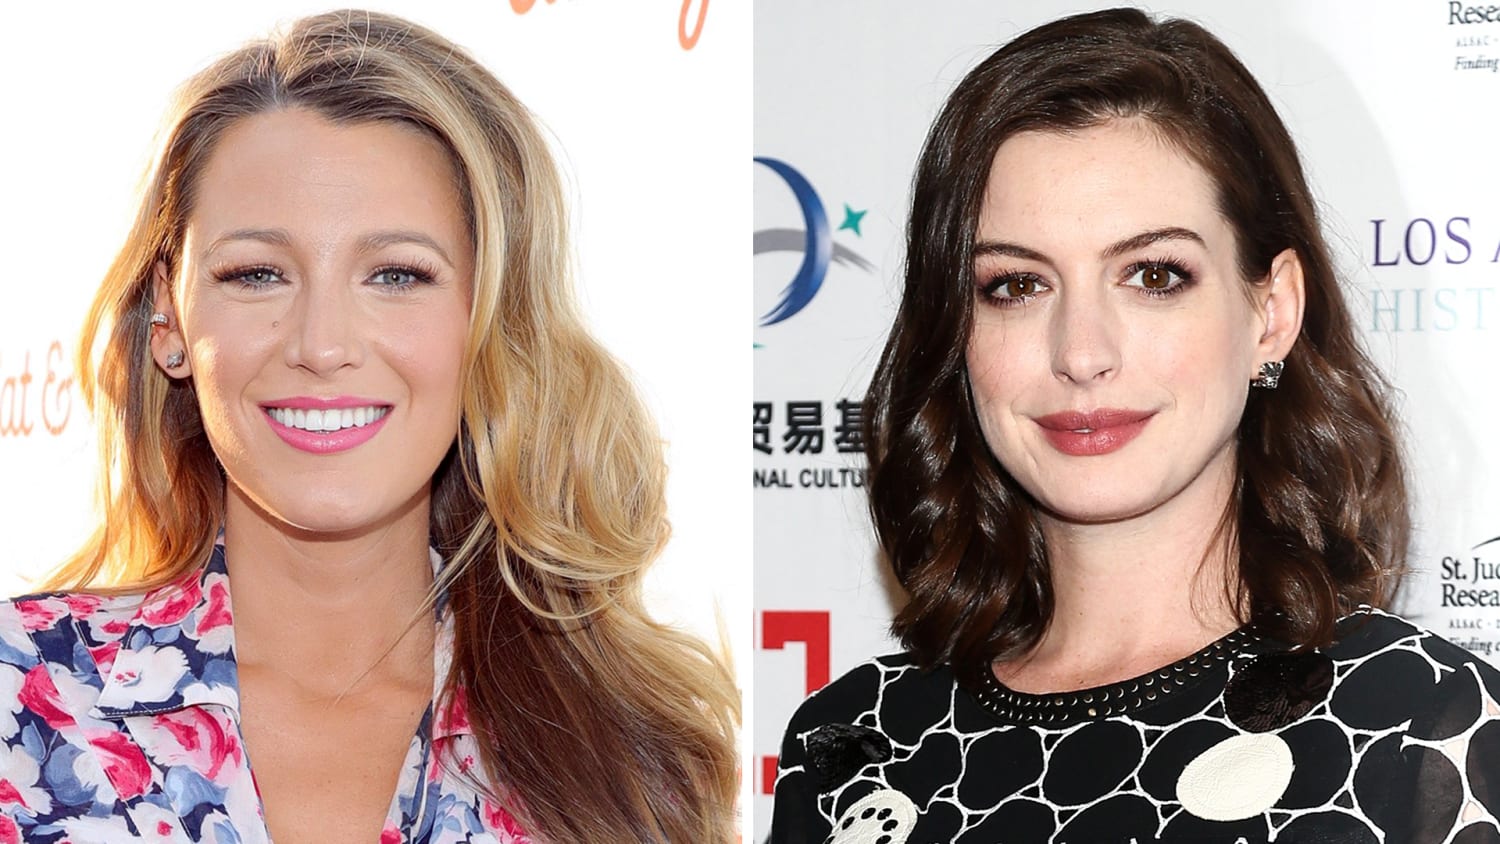 Blake Lively, Anne Hathaway celebrate post-baby bodies: 'There is no shame'